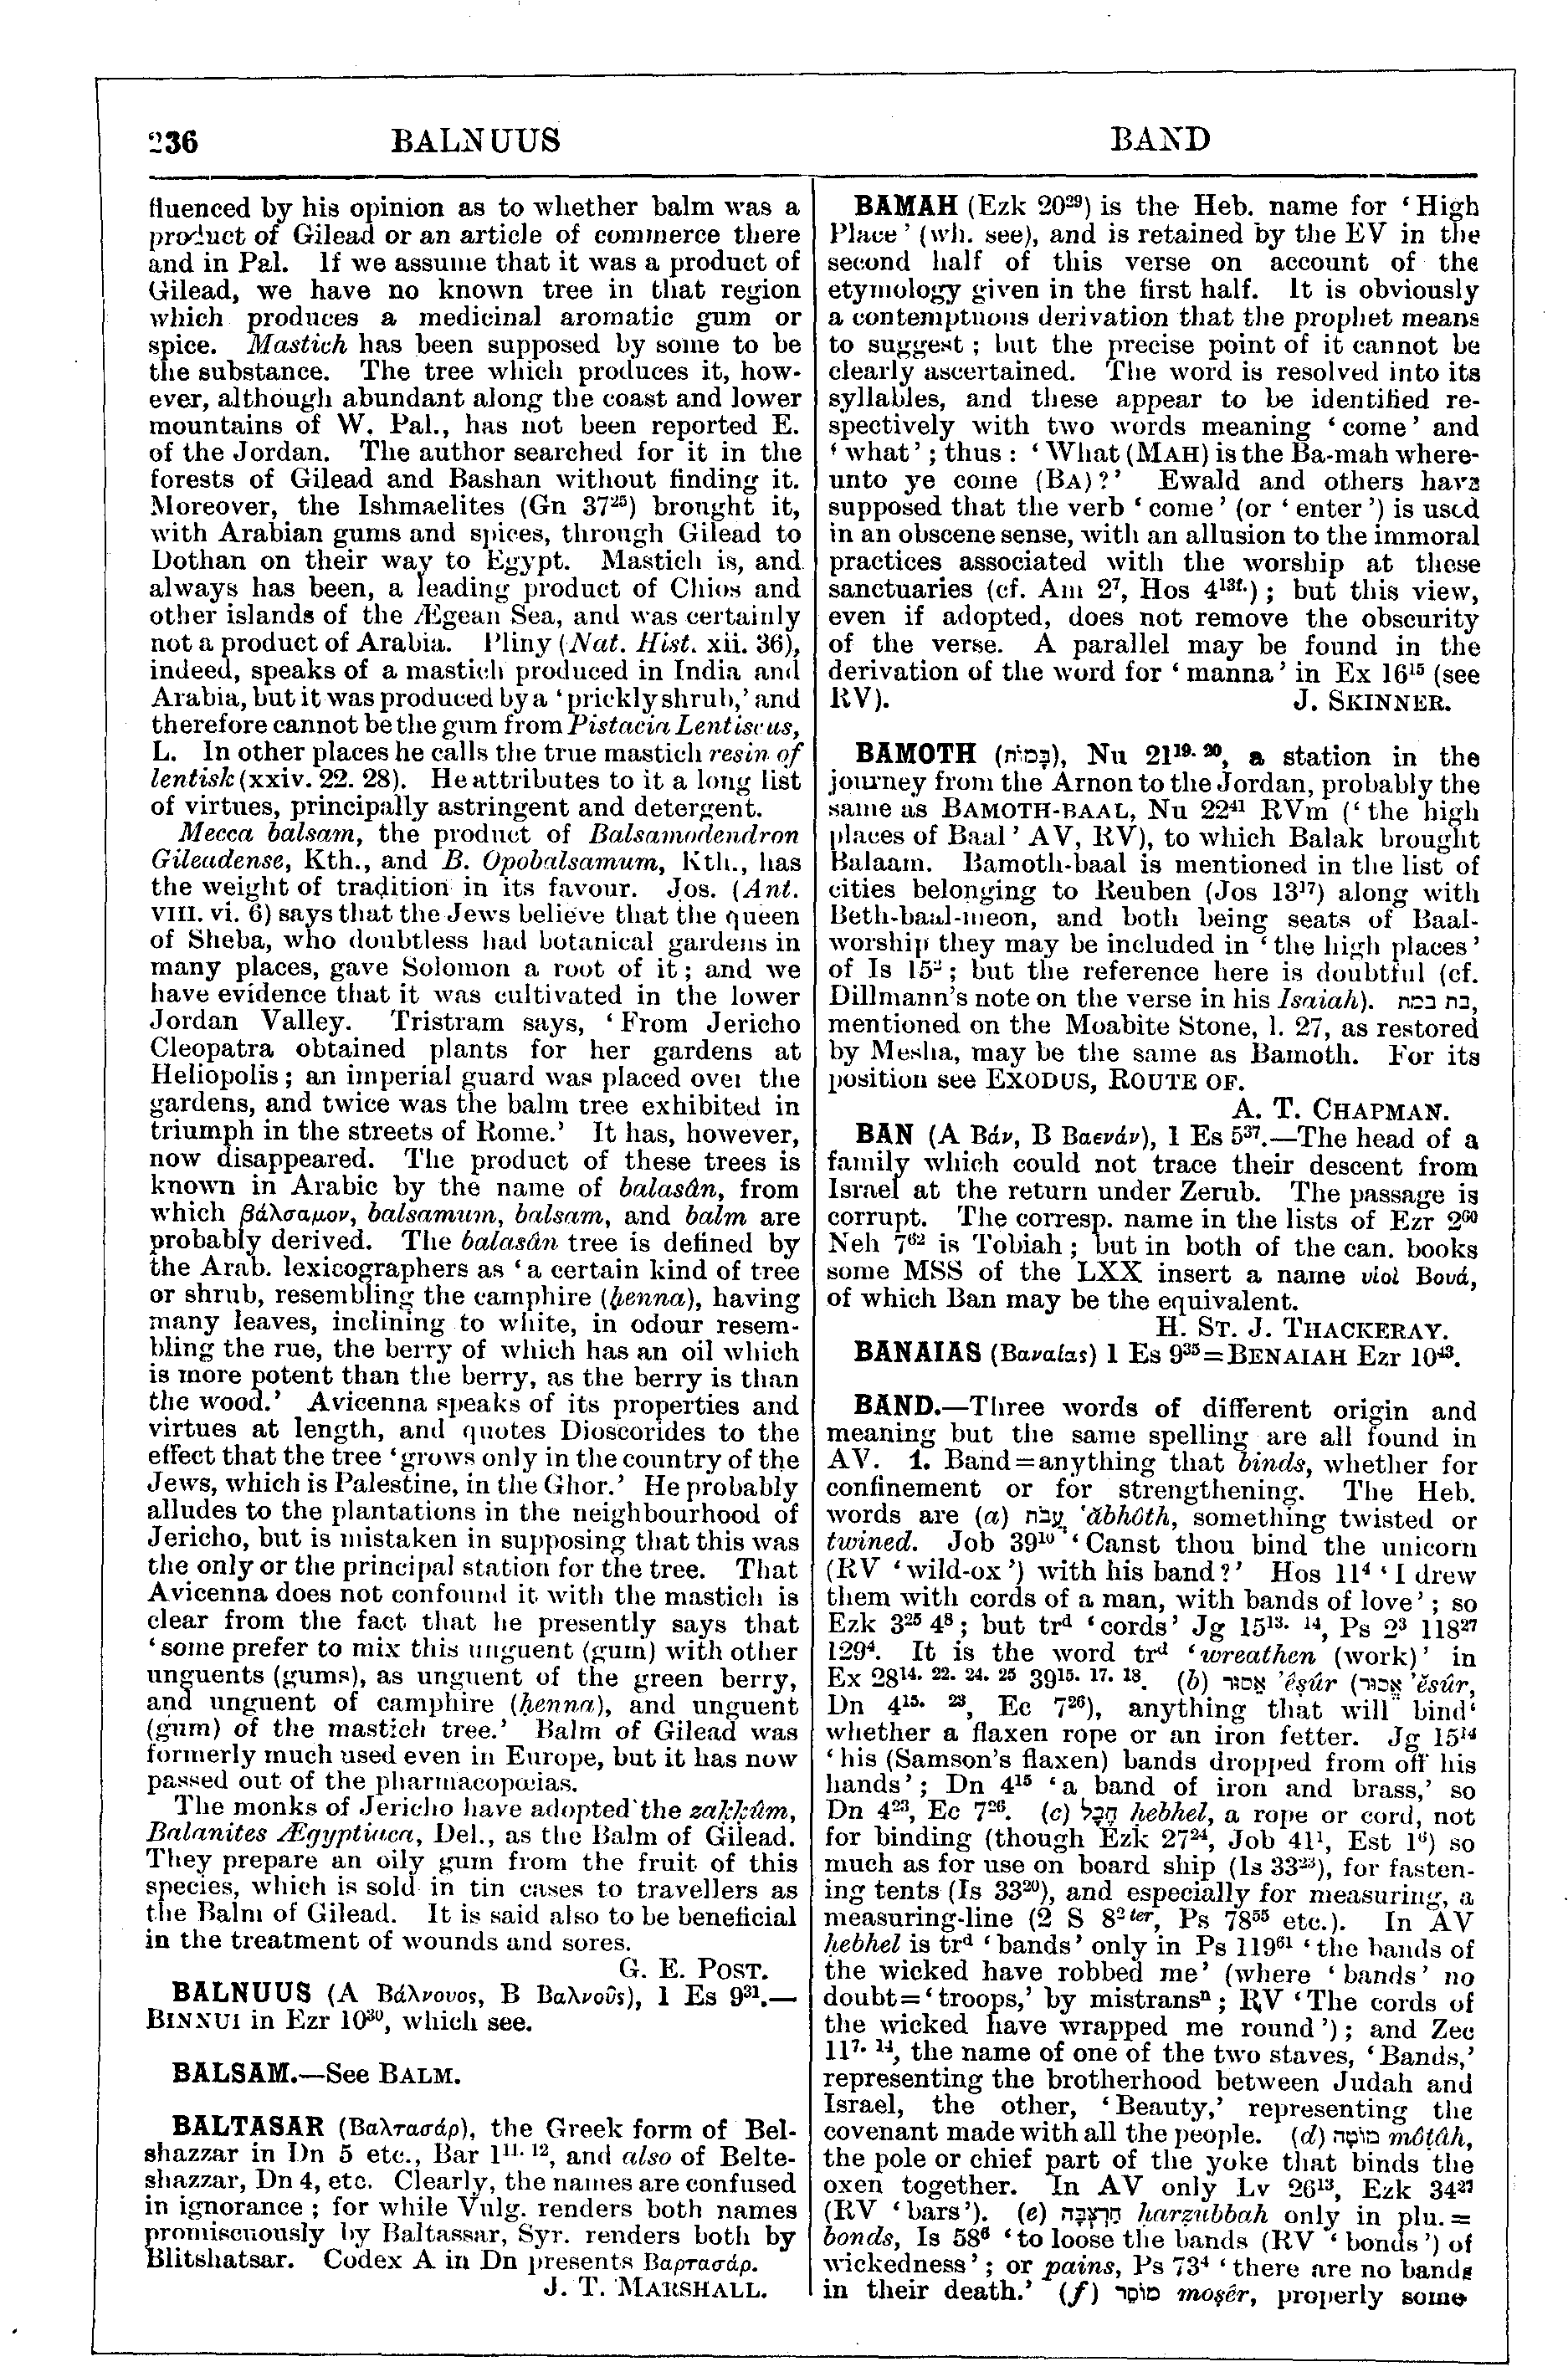 Image of page 236